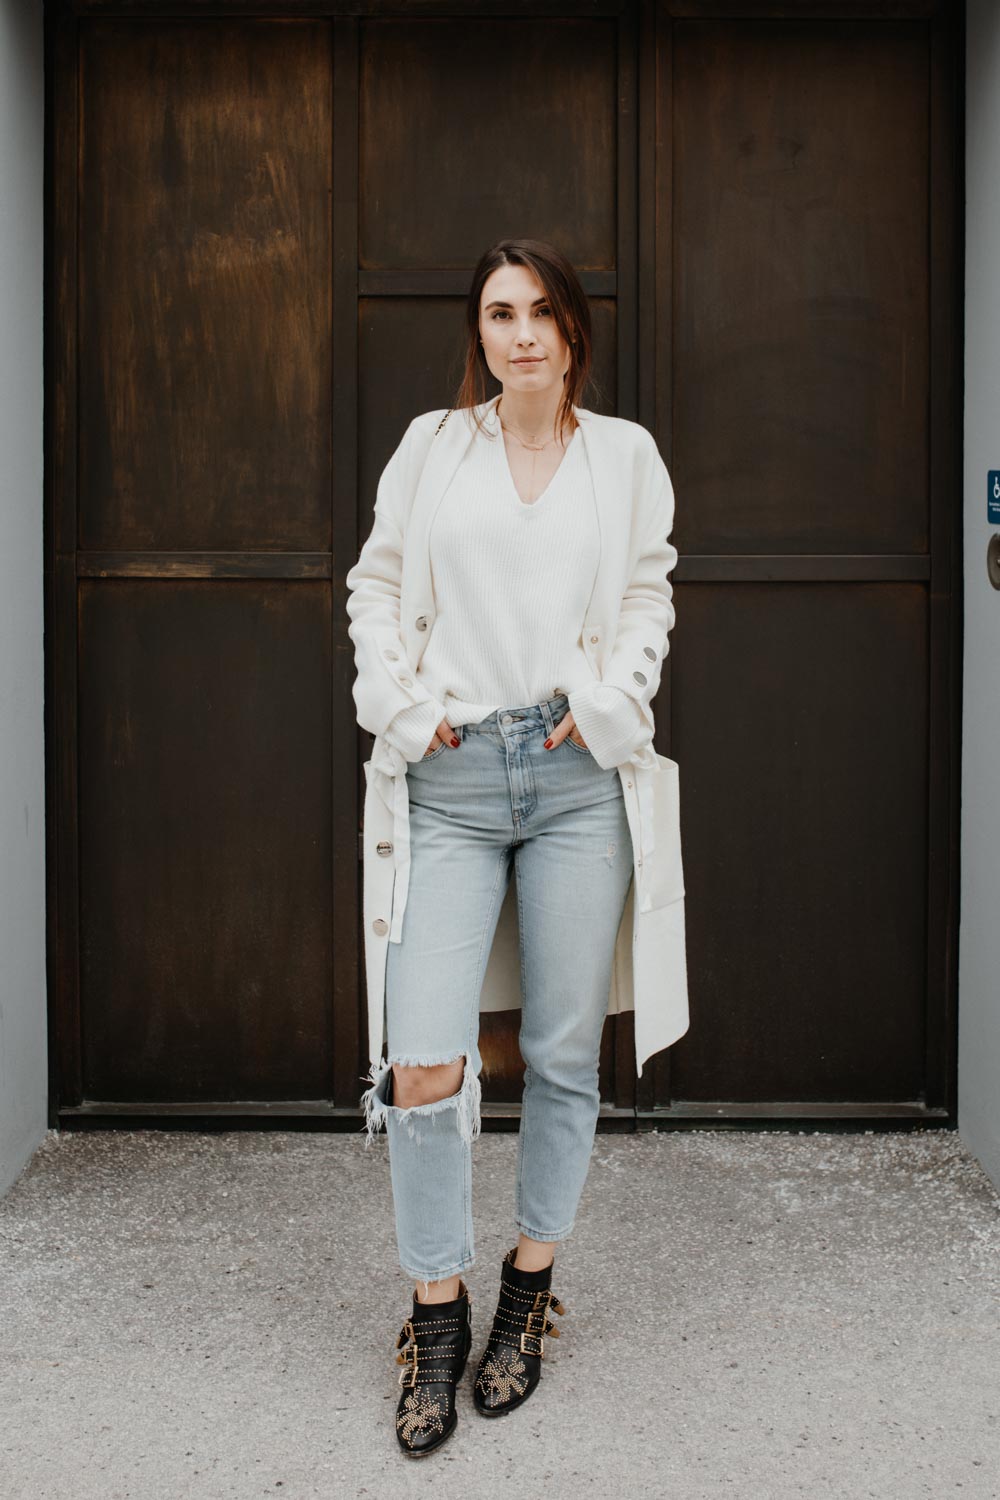 How to Wear White this Winter